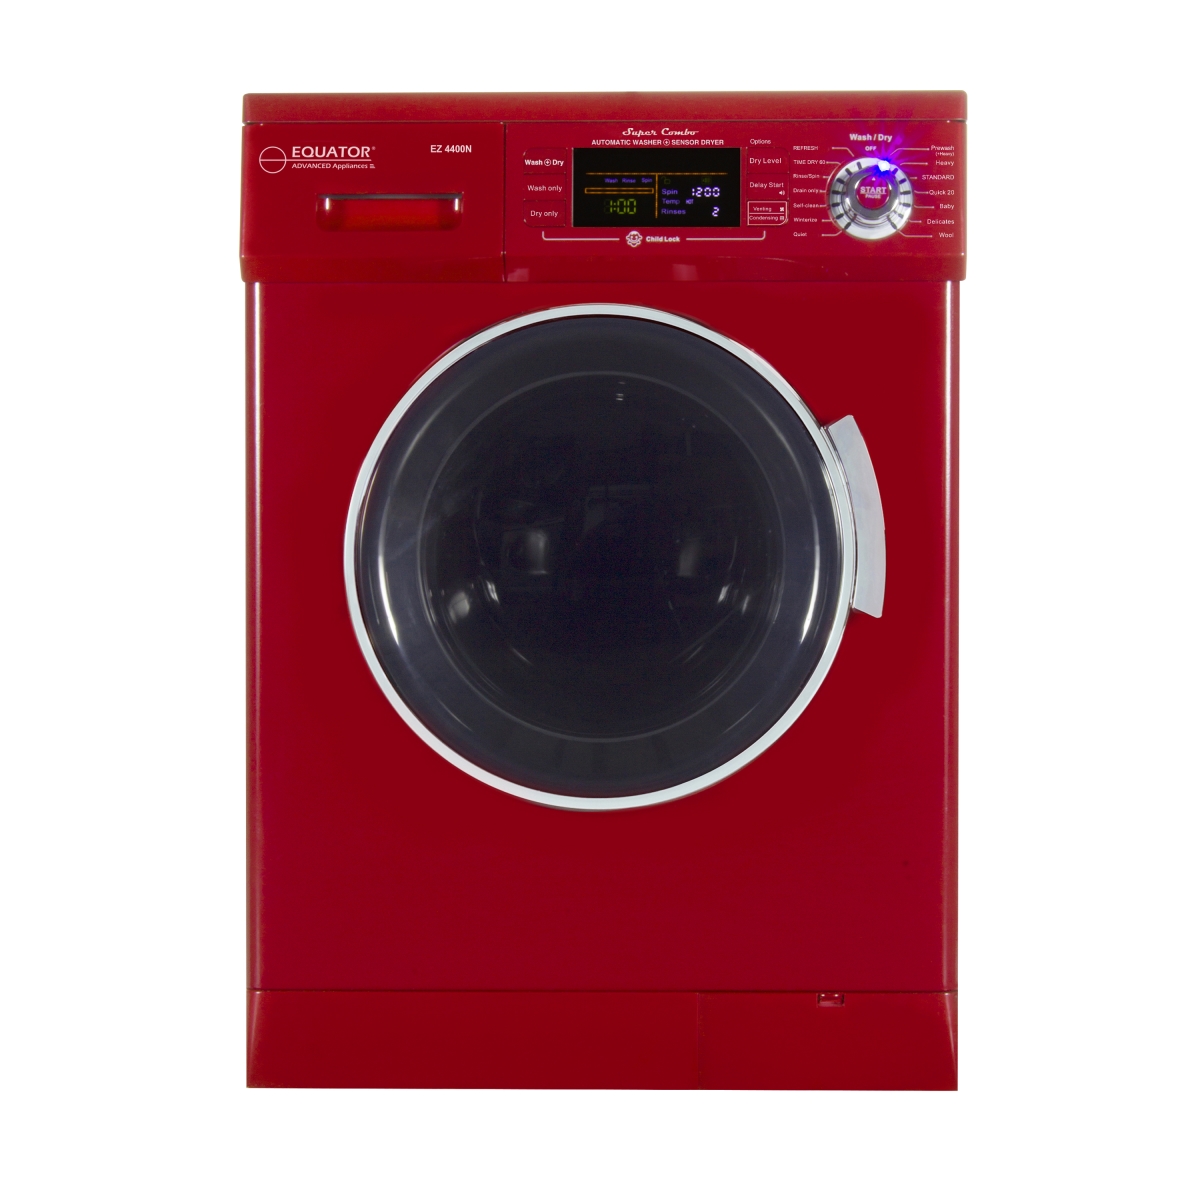 Ez 4400 N Merlot All-in-one Compact Convertible Combo Washer Dryer With Fully Digital, Merlot